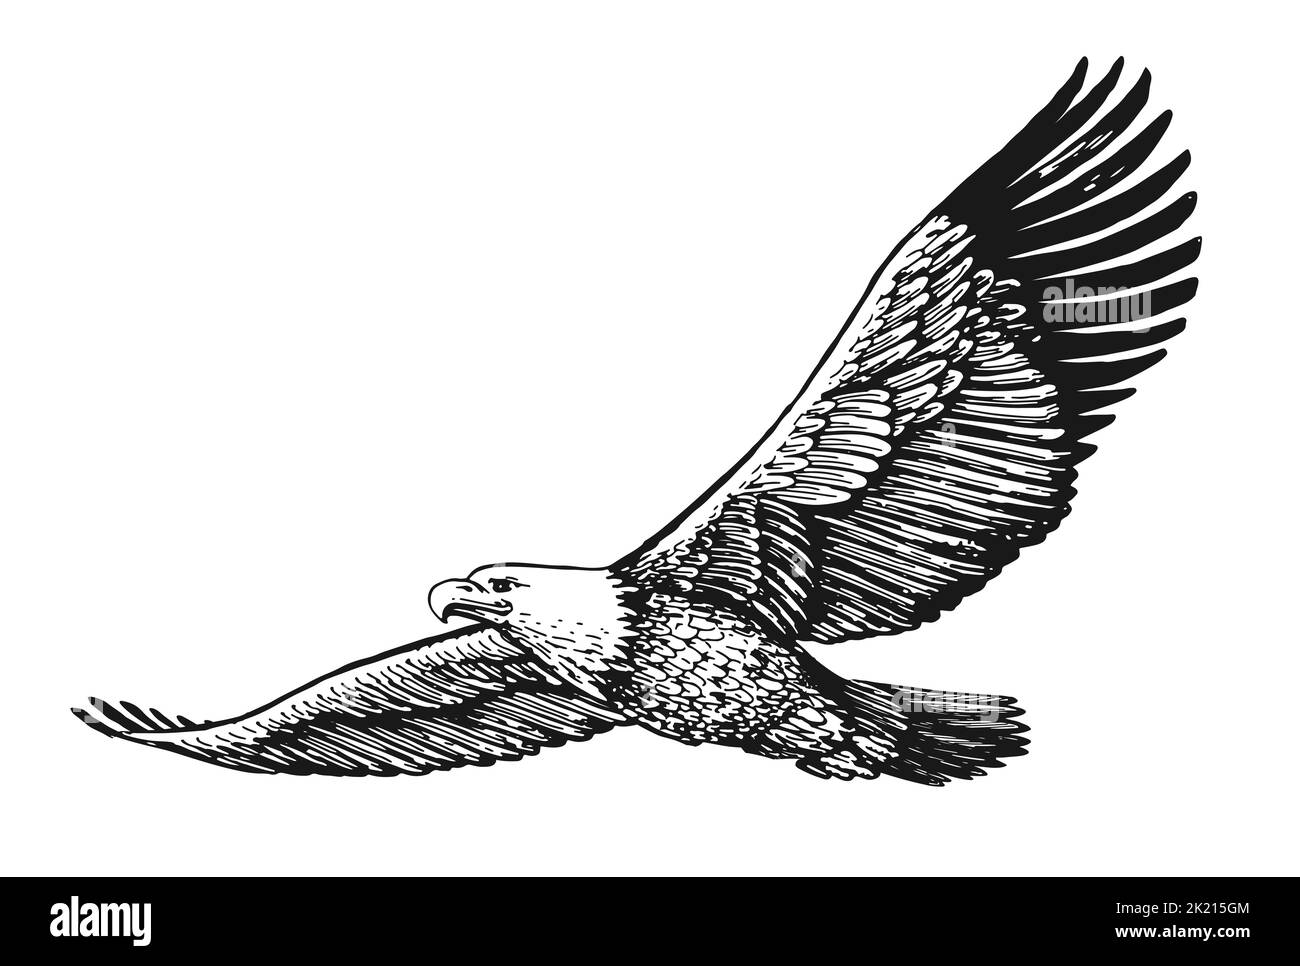 BALD EAGLE with spread wings in flight isolated on white. Hand drawn sketch bird illustration in vintage engraving style Stock Photo